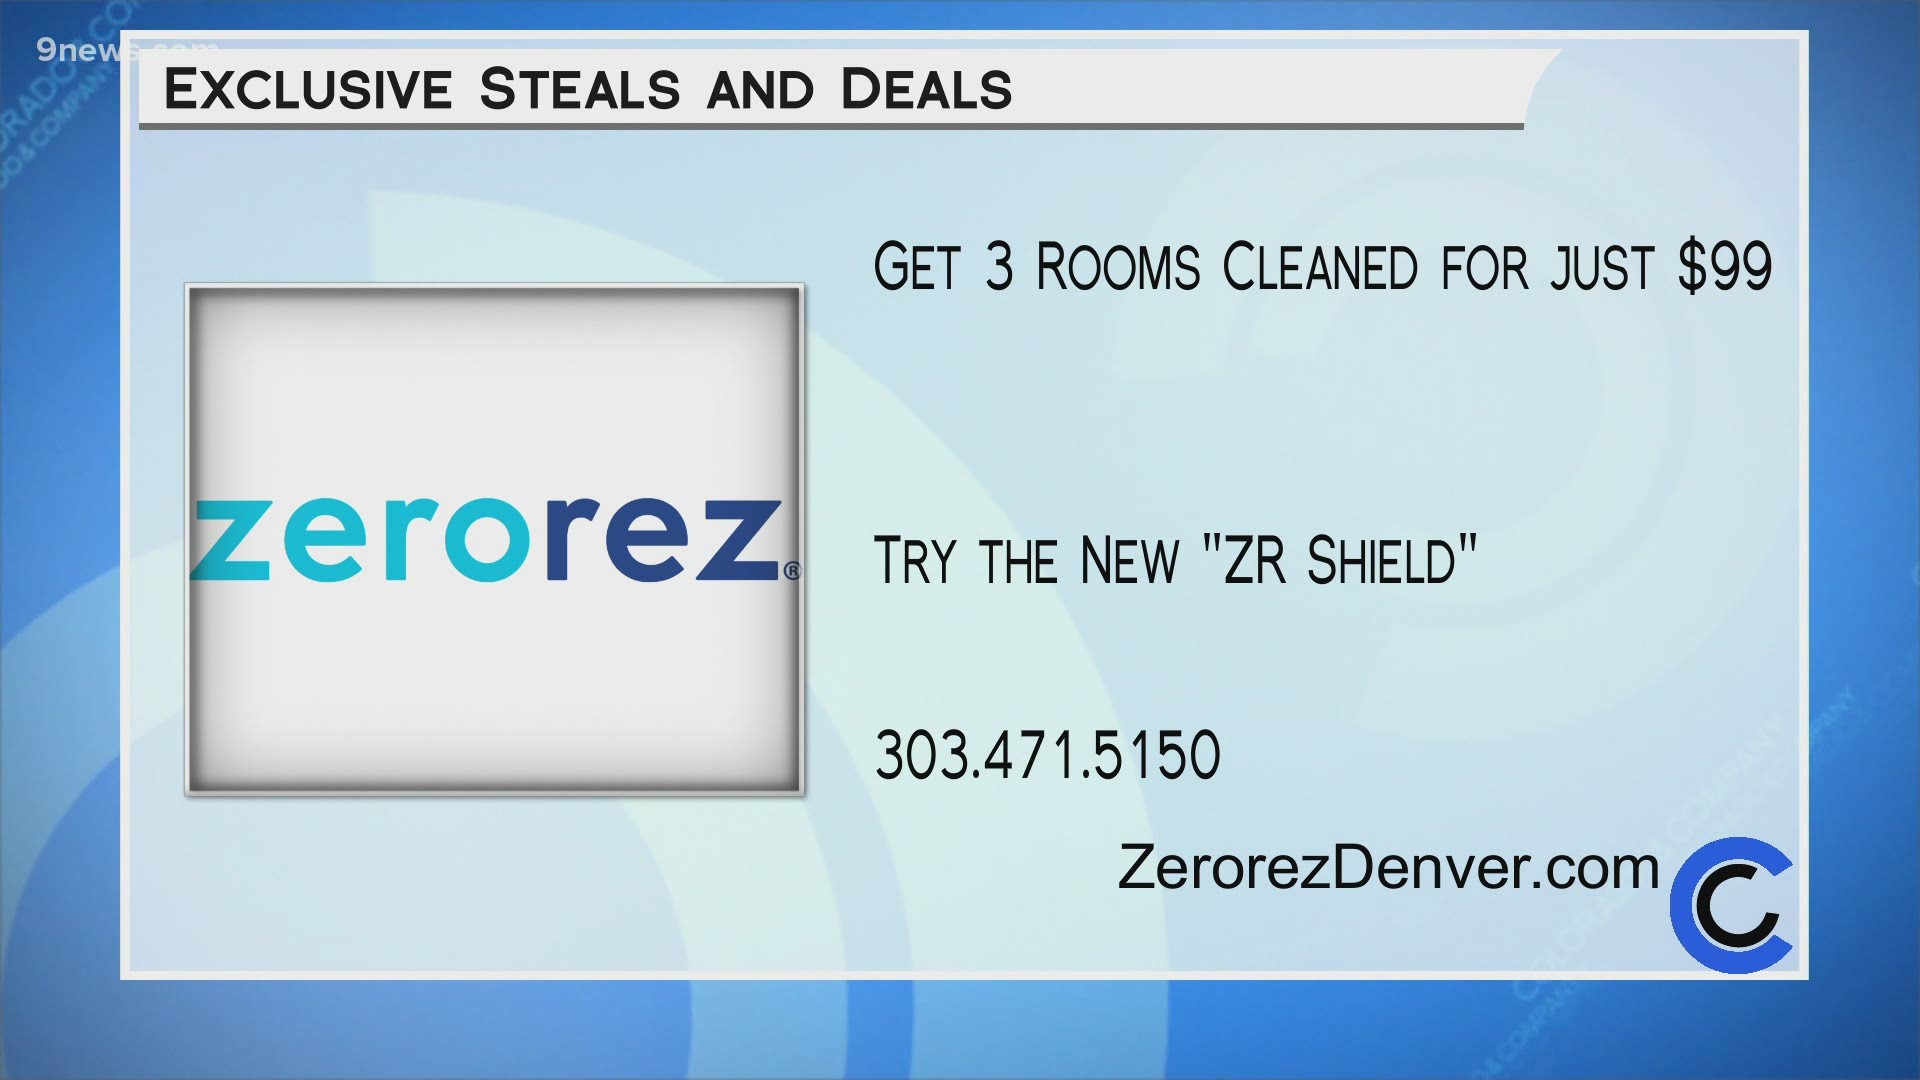 Keep your carpets cleaner longer. Get 3 rooms cleaned for just $99! Learn more at ZerorezDenver.com or call 303.471.5150.